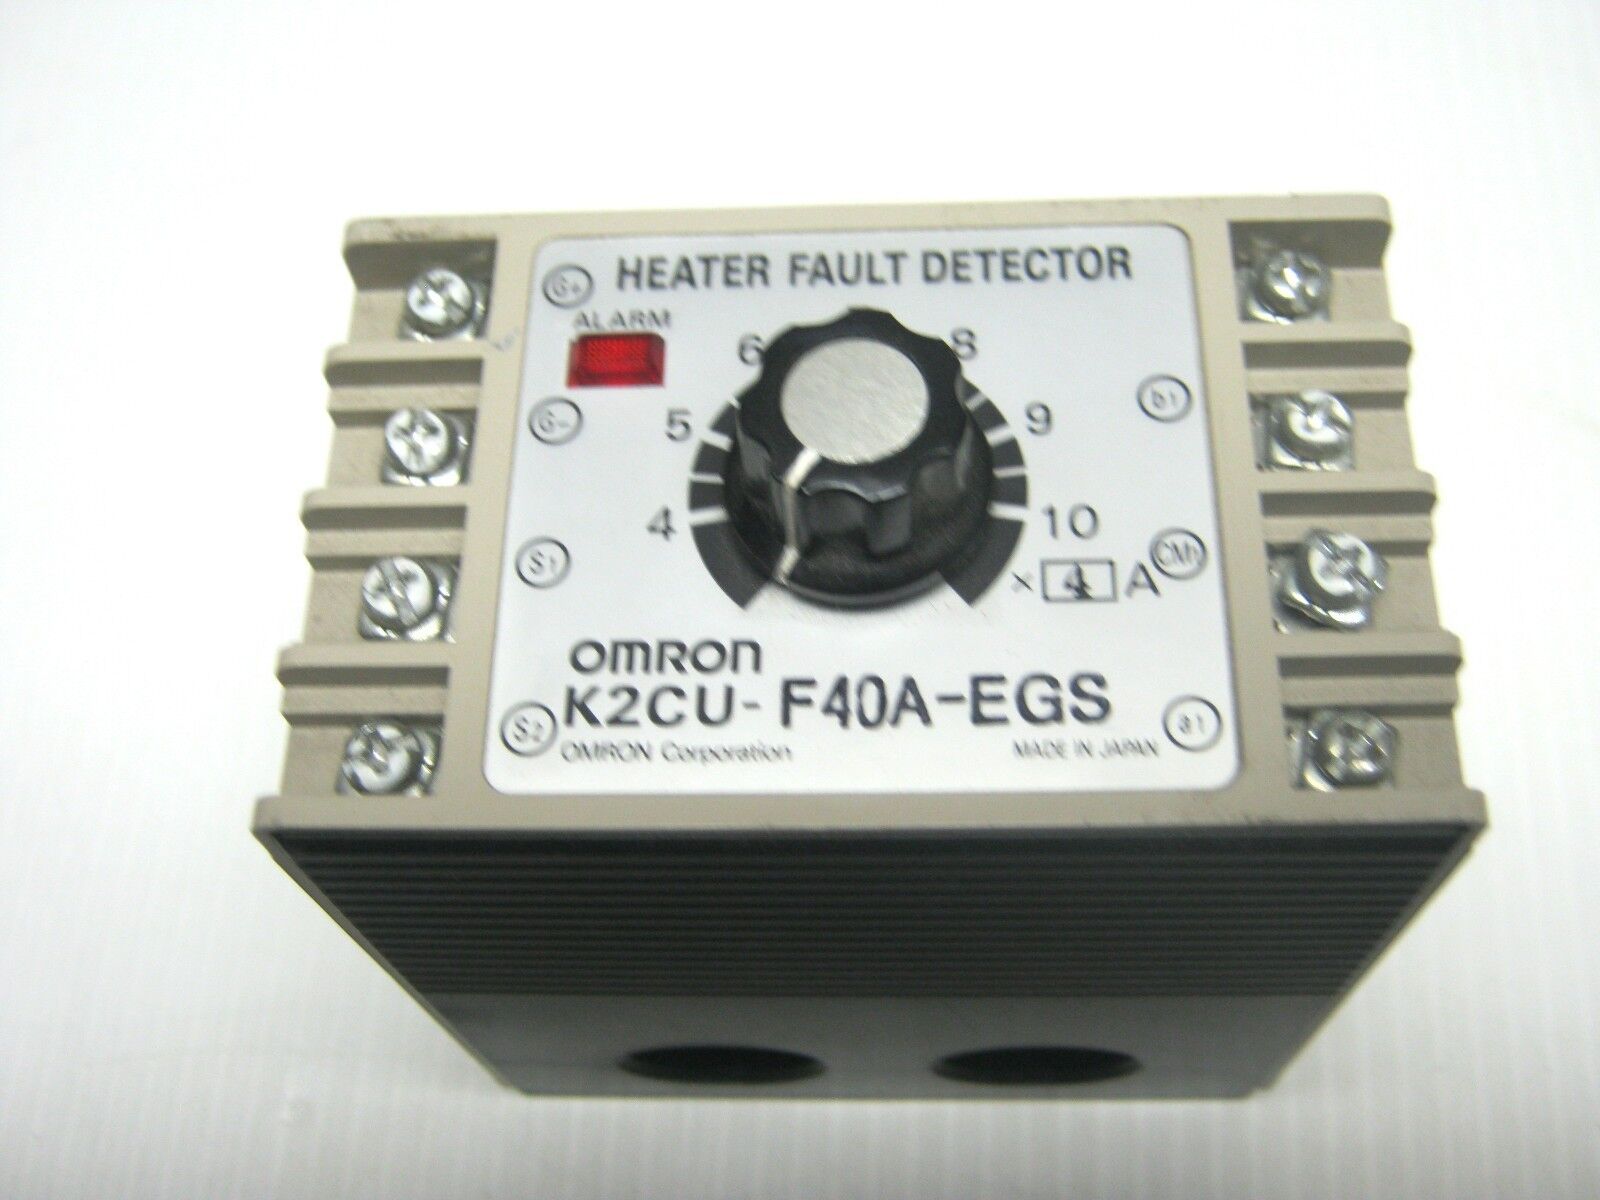 Omron K2CU-F40A-EGS Heater Fault Detector 200V AC 50A Max. Current  ~